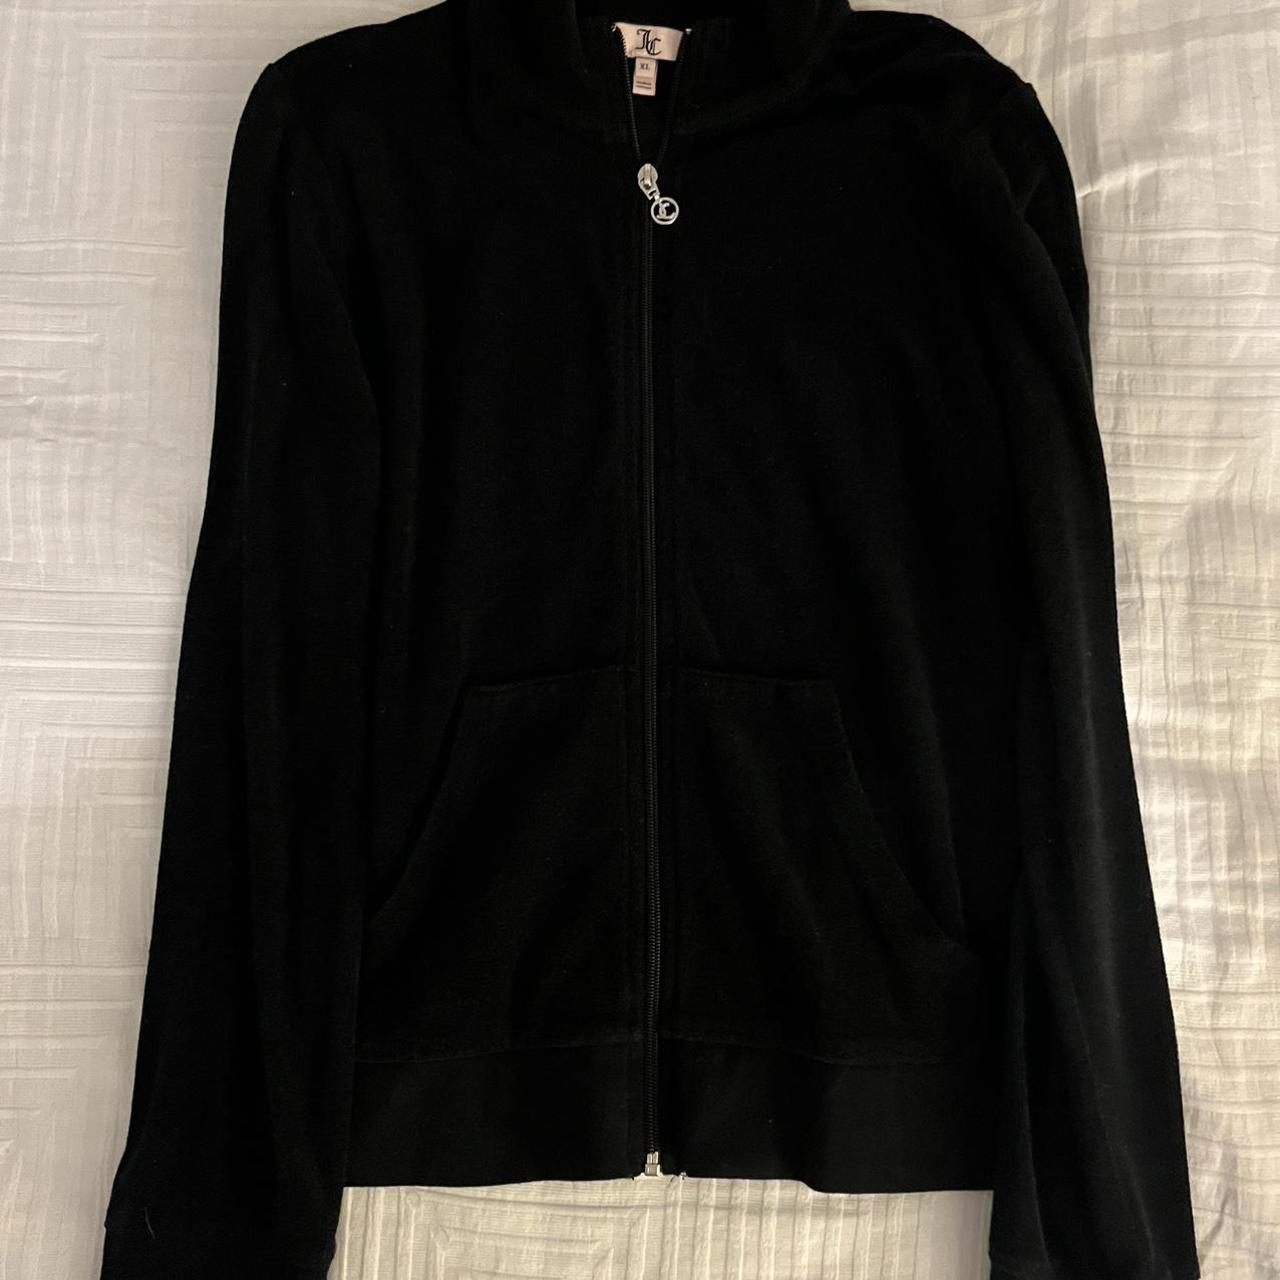 JUICY COUTURE zip up !⭐️ -Fits a size (XL) -Great... - Depop